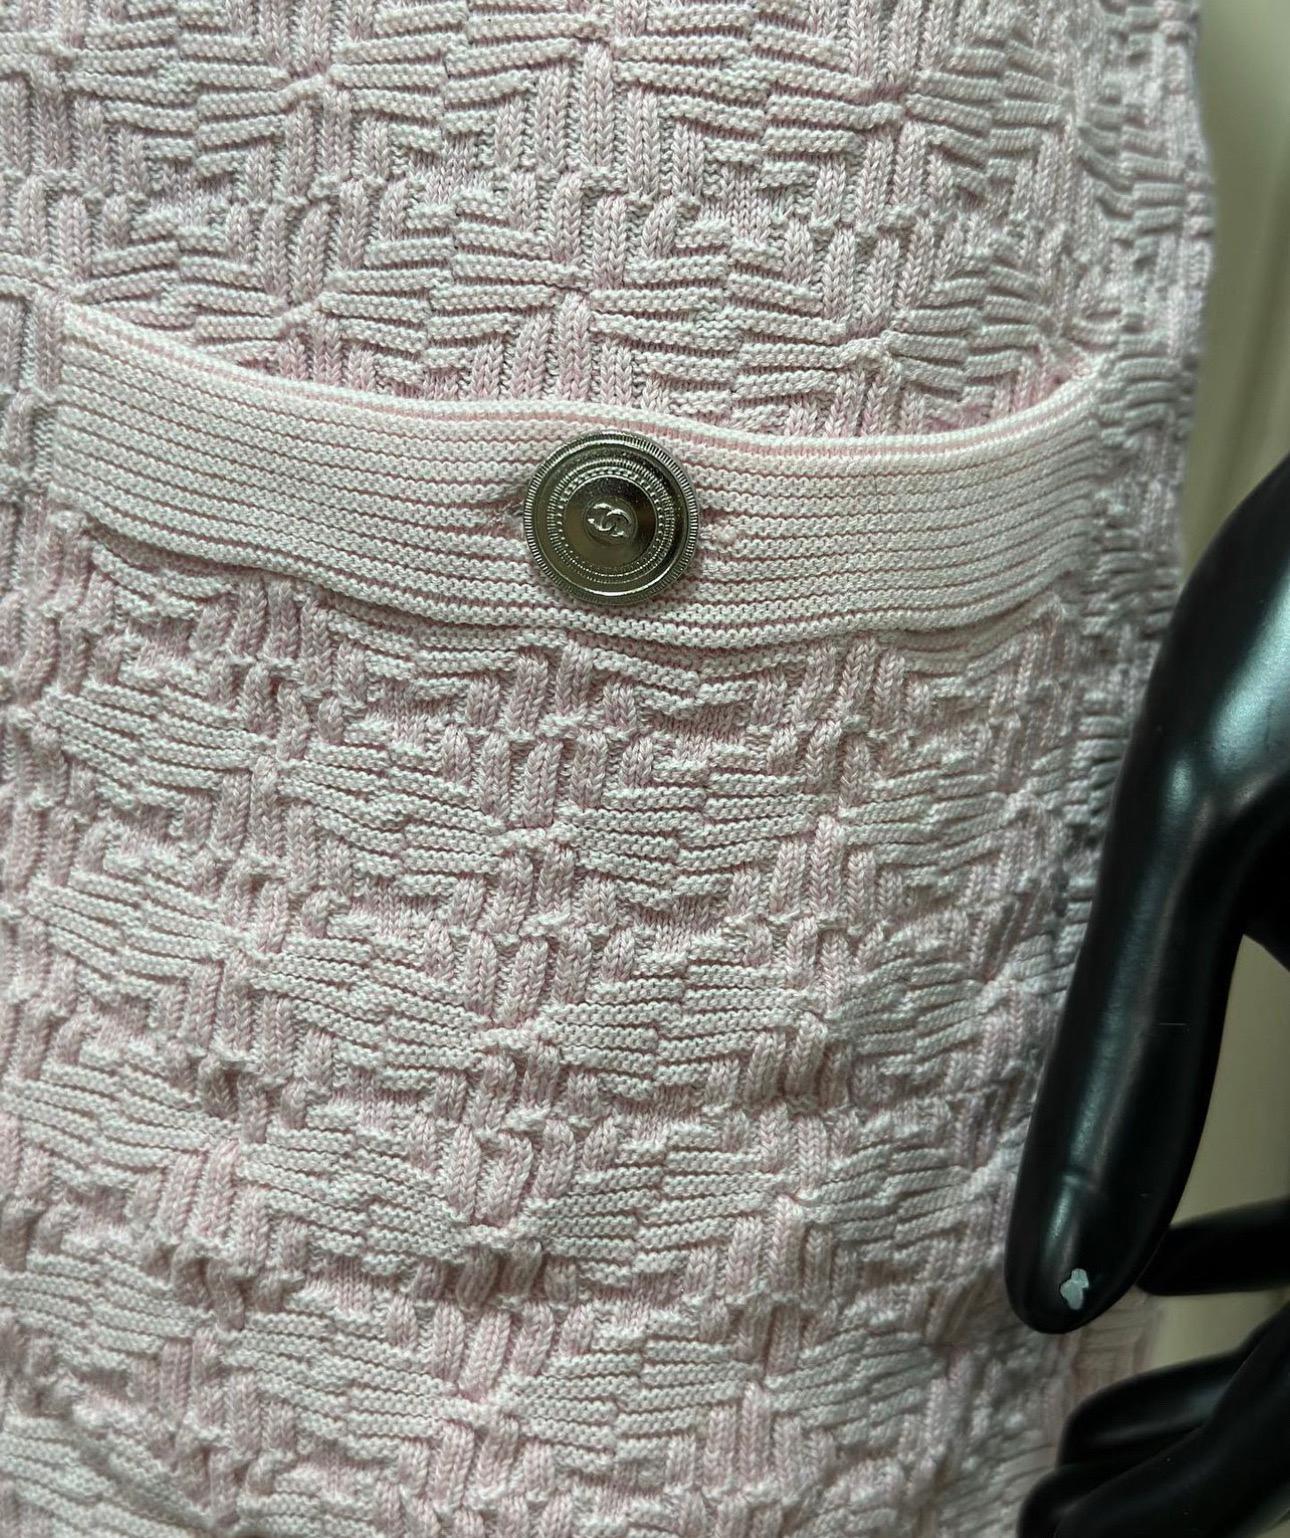 Chanel Cotton Knitted Dress

Baby pink dress with silver' 'CC' logo buttons to the shoulders and pockets.

Size - 44 FR

Condition - Very Good

Composition - Cotton 